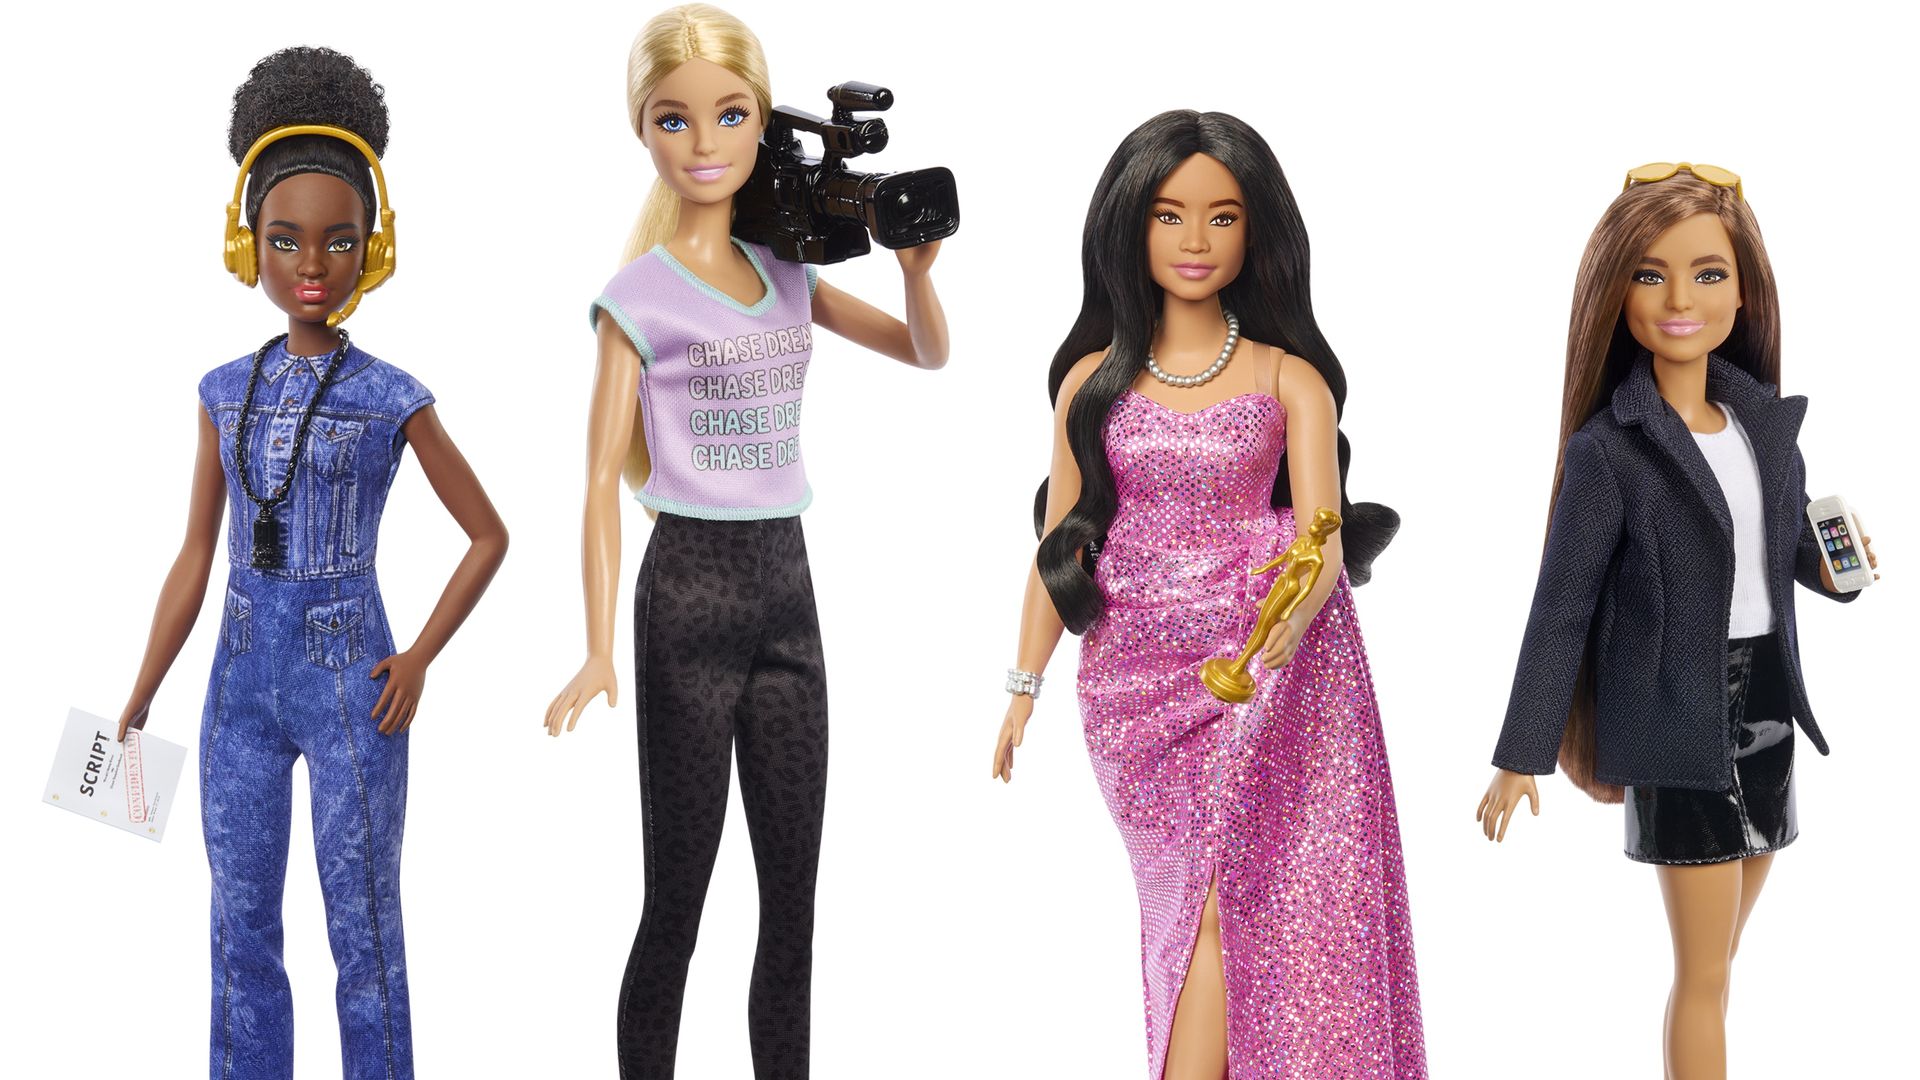 Barbie career dolls unveiled with director, movie star after summer hit